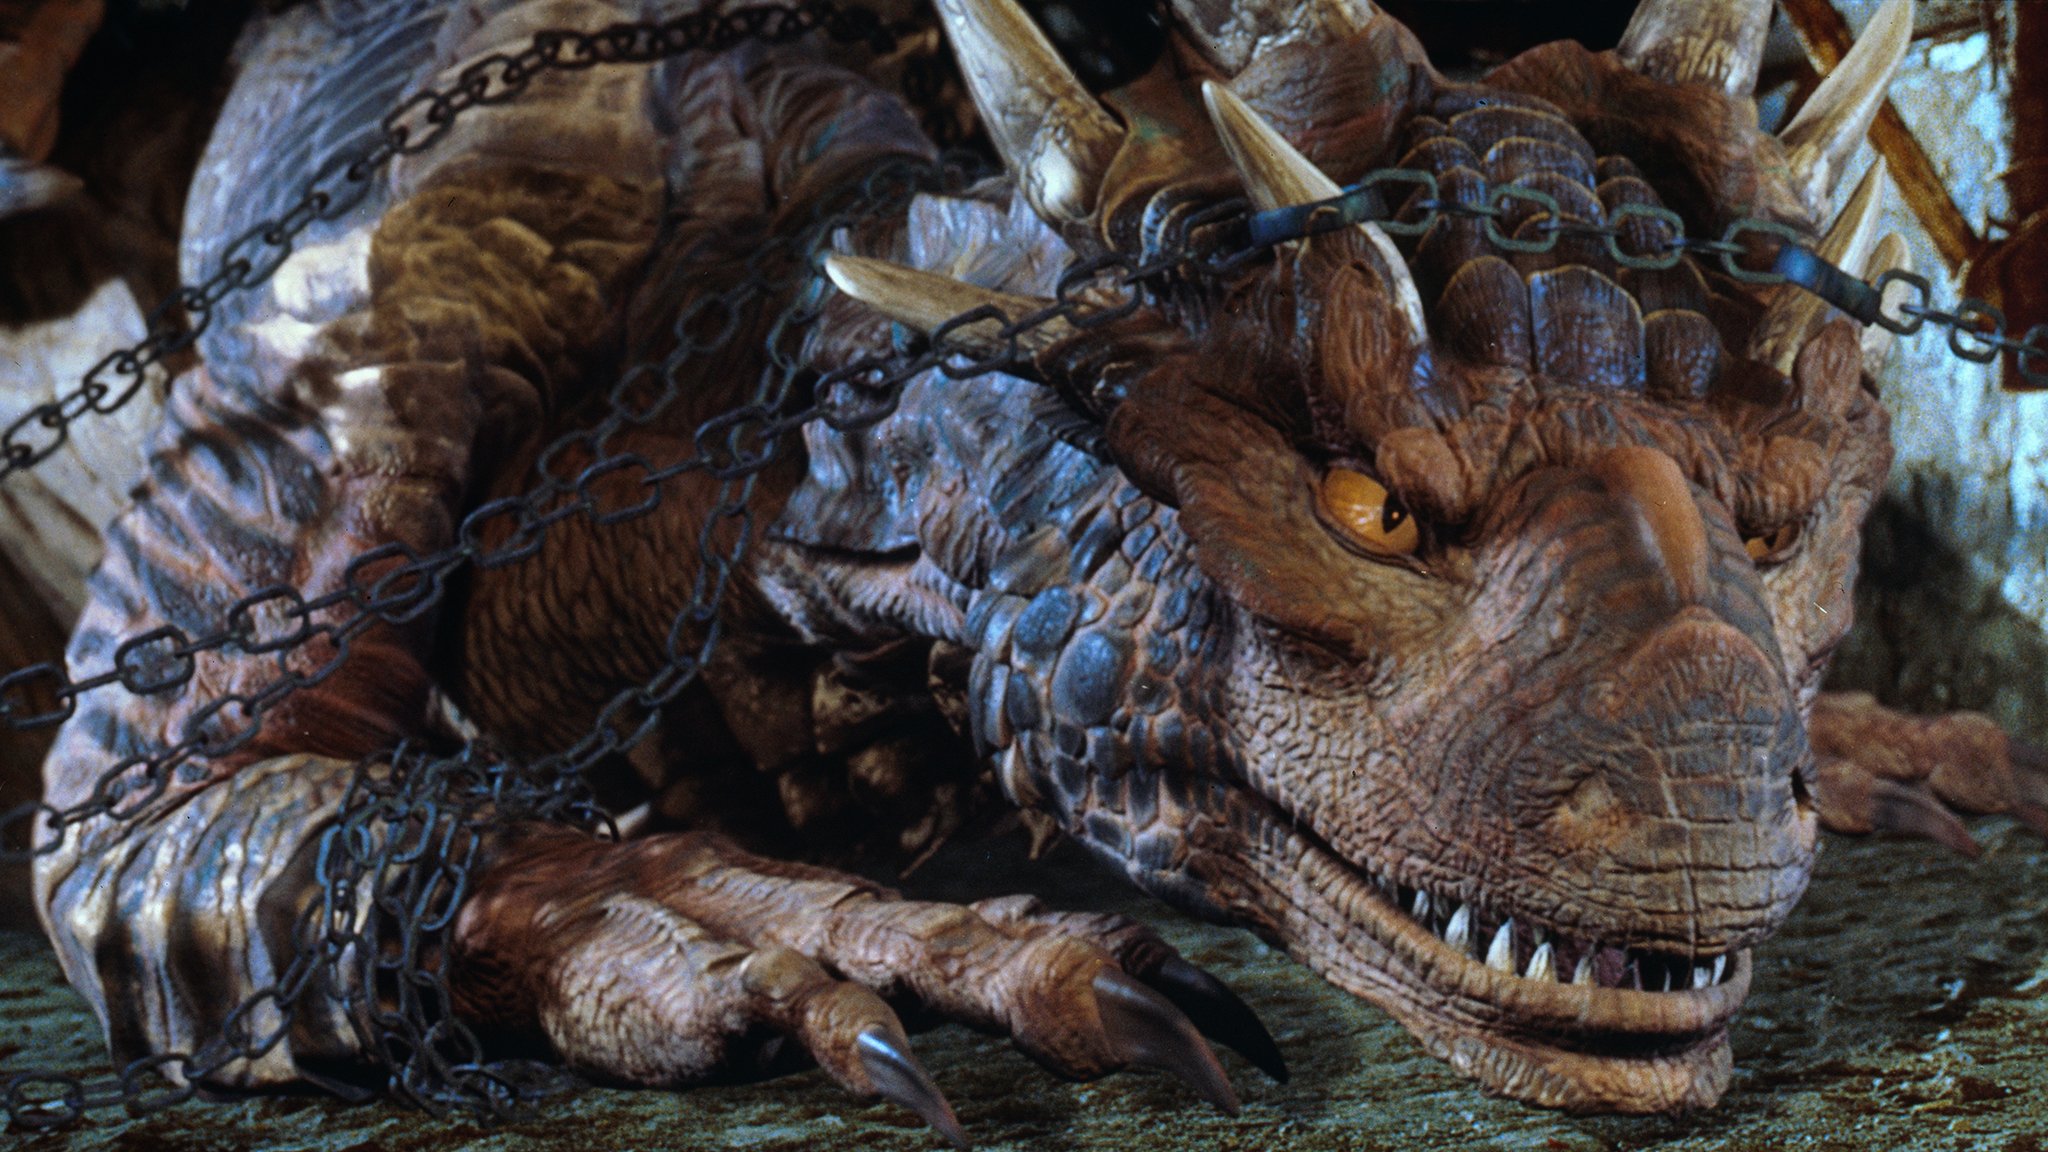 Download dragonheart image for free